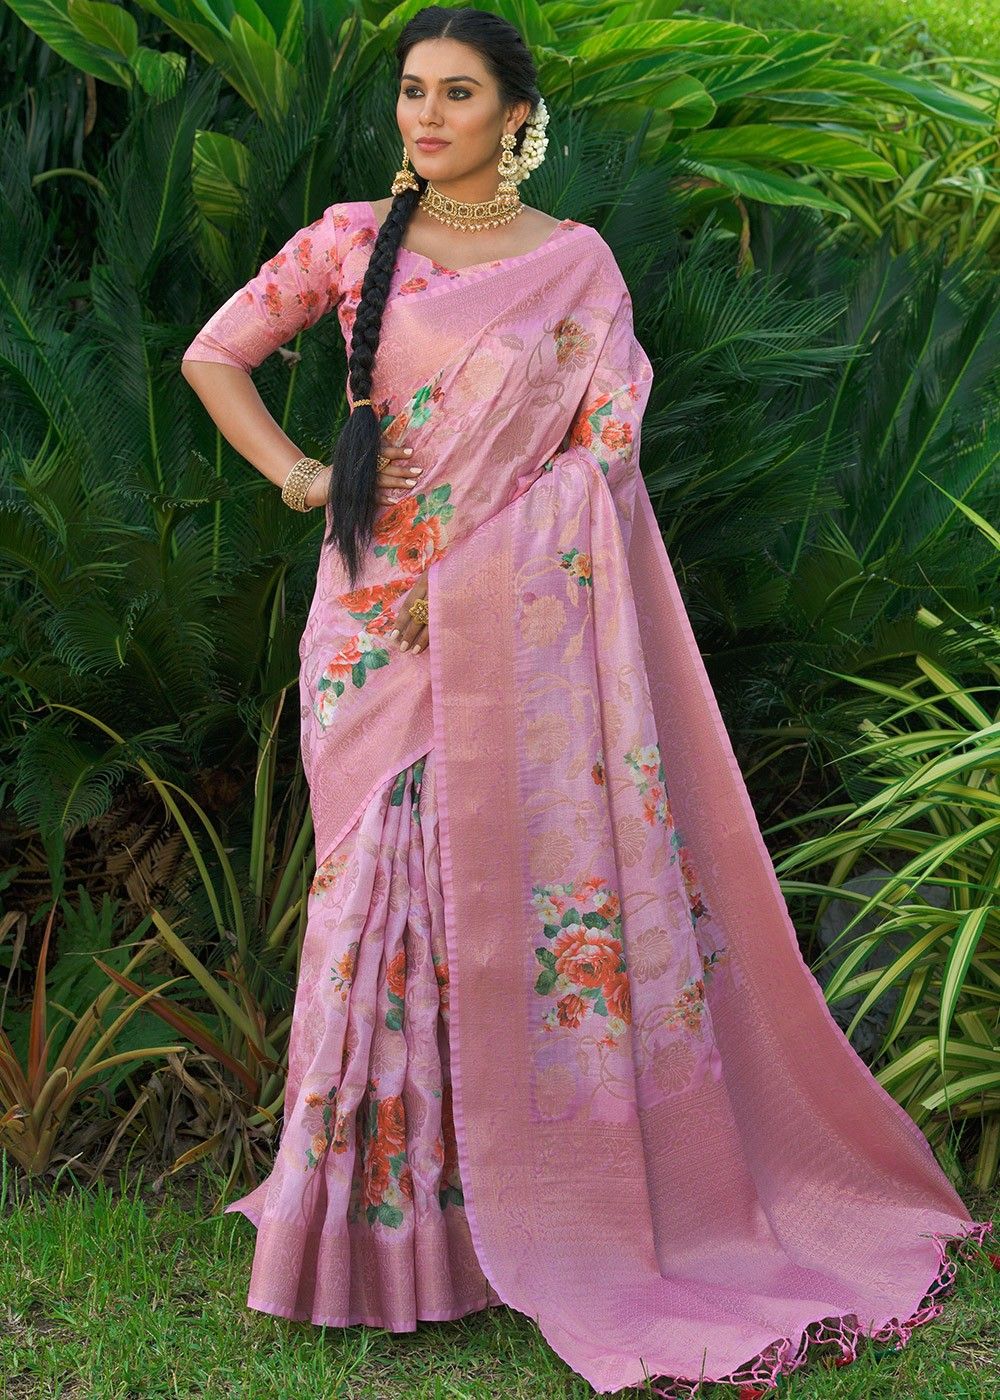 Floral Sarees To Make Your Summers Pleasant